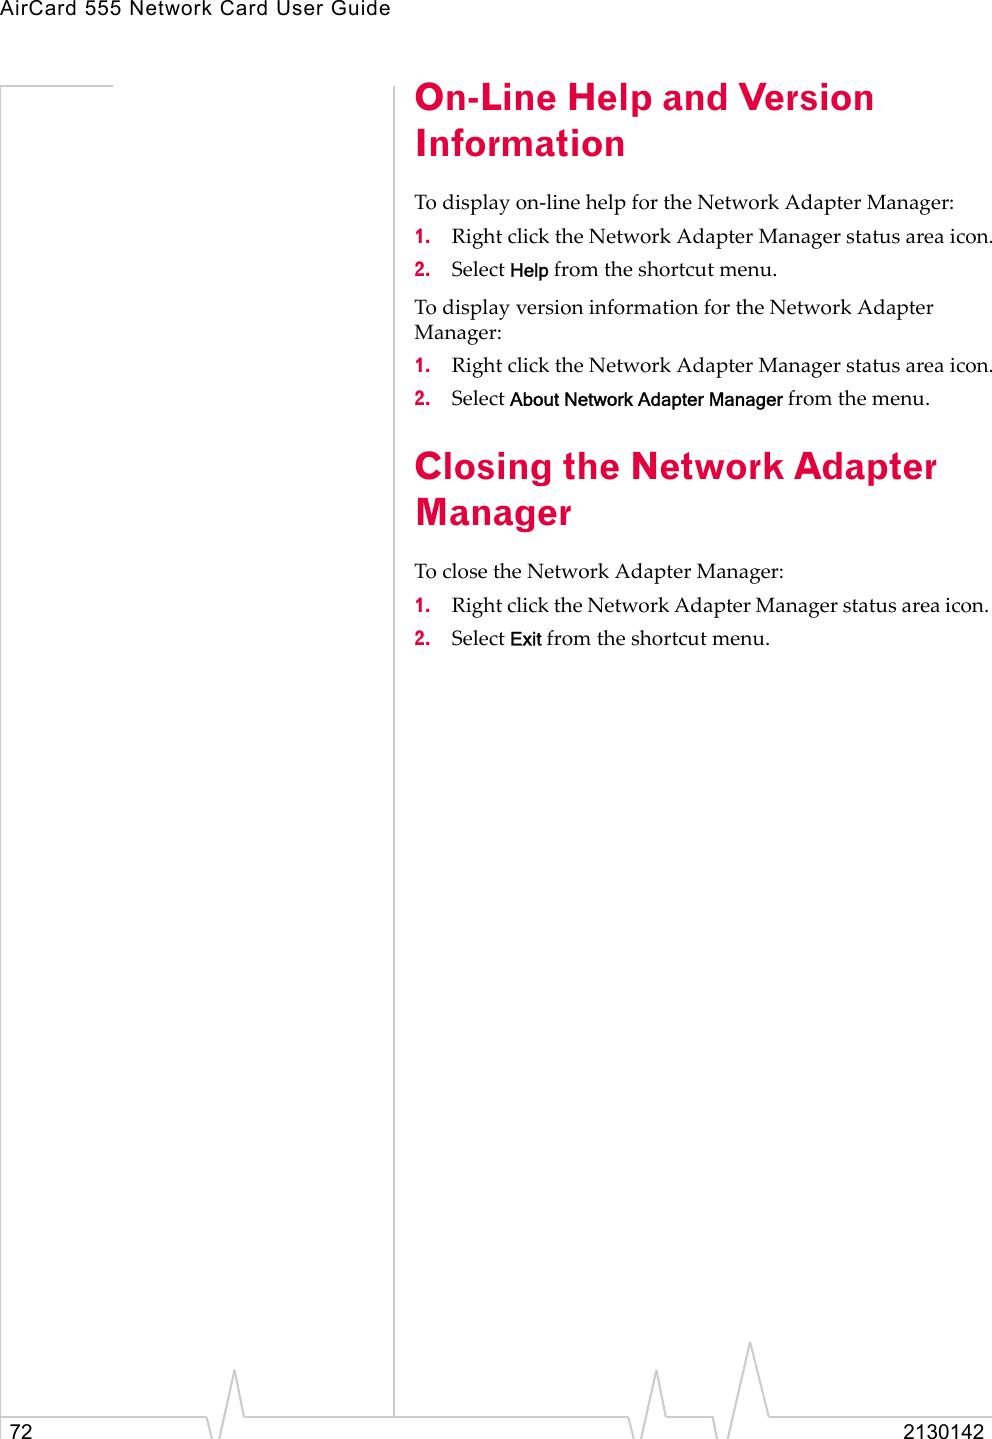 AirCard 555 Network Card User Guide72 2130142On-Line Help and Version InformationTo display on-line help for the Network Adapter Manager:1. Right click the Network Adapter Manager status area icon.2. Select Help from the shortcut menu.To display version information for the Network Adapter Manager:1. Right click the Network Adapter Manager status area icon.2. Select About Network Adapter Manager from the menu.Closing the Network Adapter ManagerTo close the Network Adapter Manager: 1. Right click the Network Adapter Manager status area icon. 2. Select Exit from the shortcut menu.